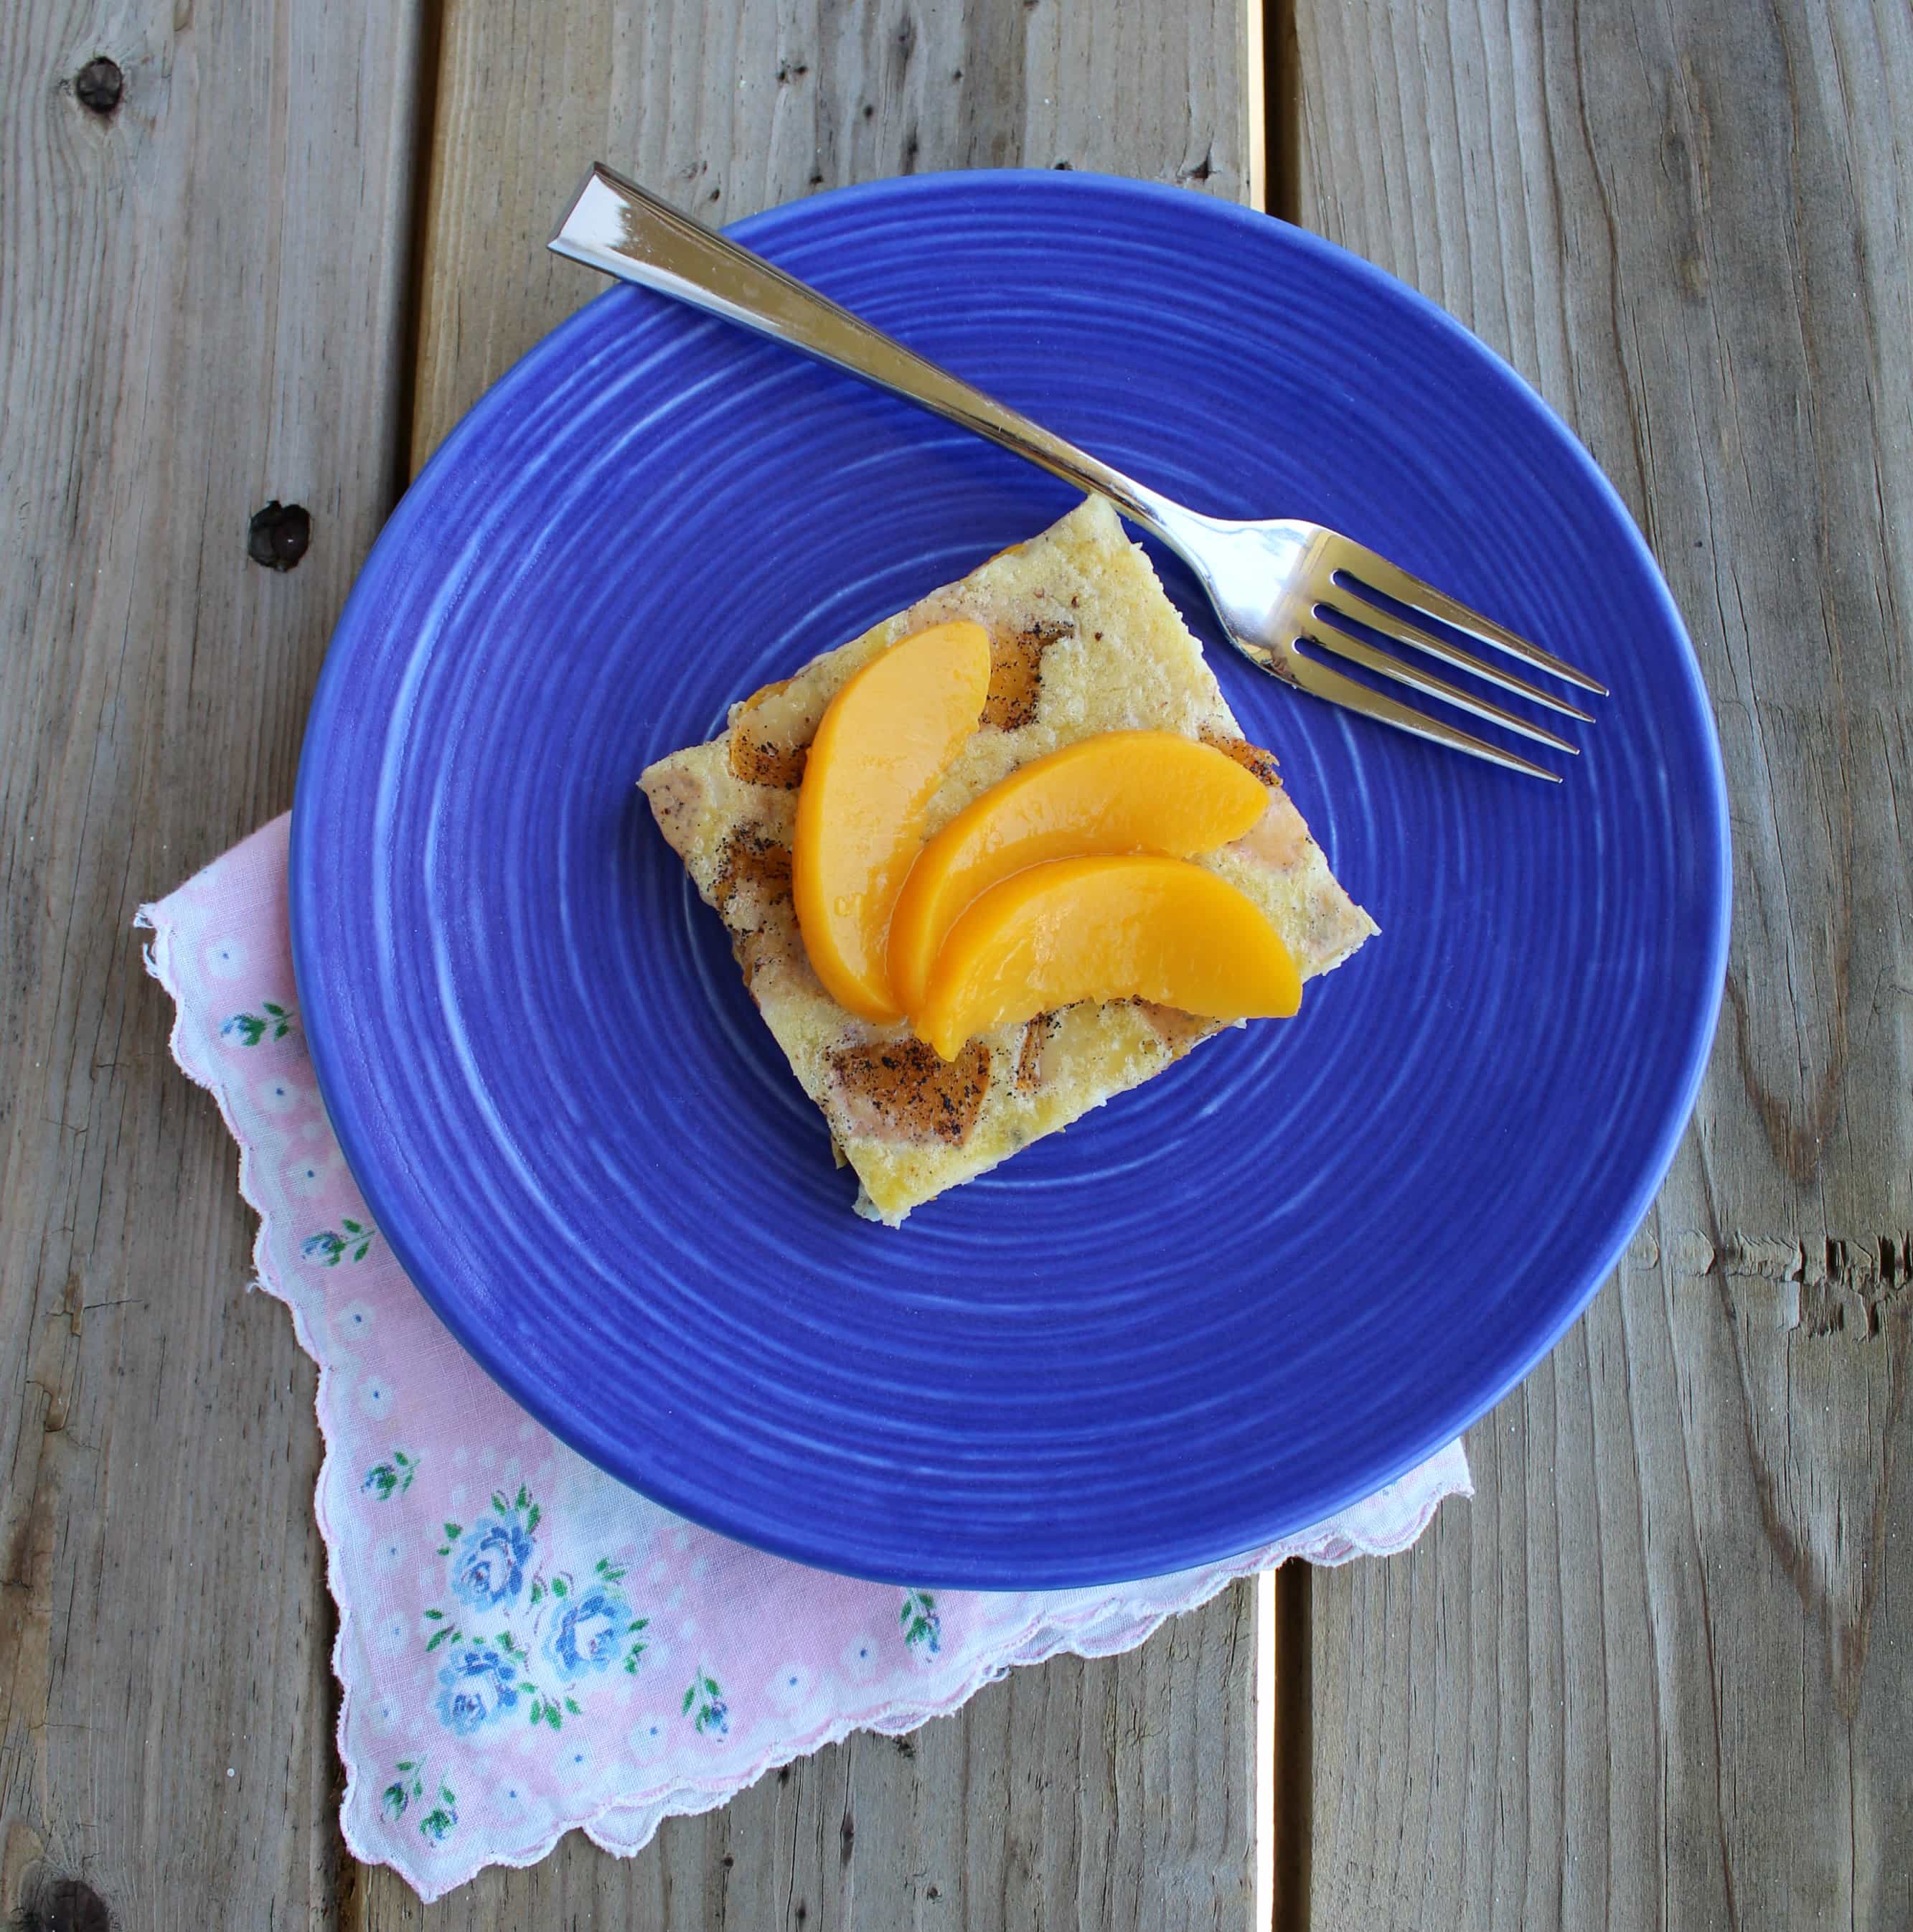 Puffy Peach Pancake with Vanilla Beans - let your breakfast bake while you sip coffee! Get the easy recipe on RachelCooks.com!